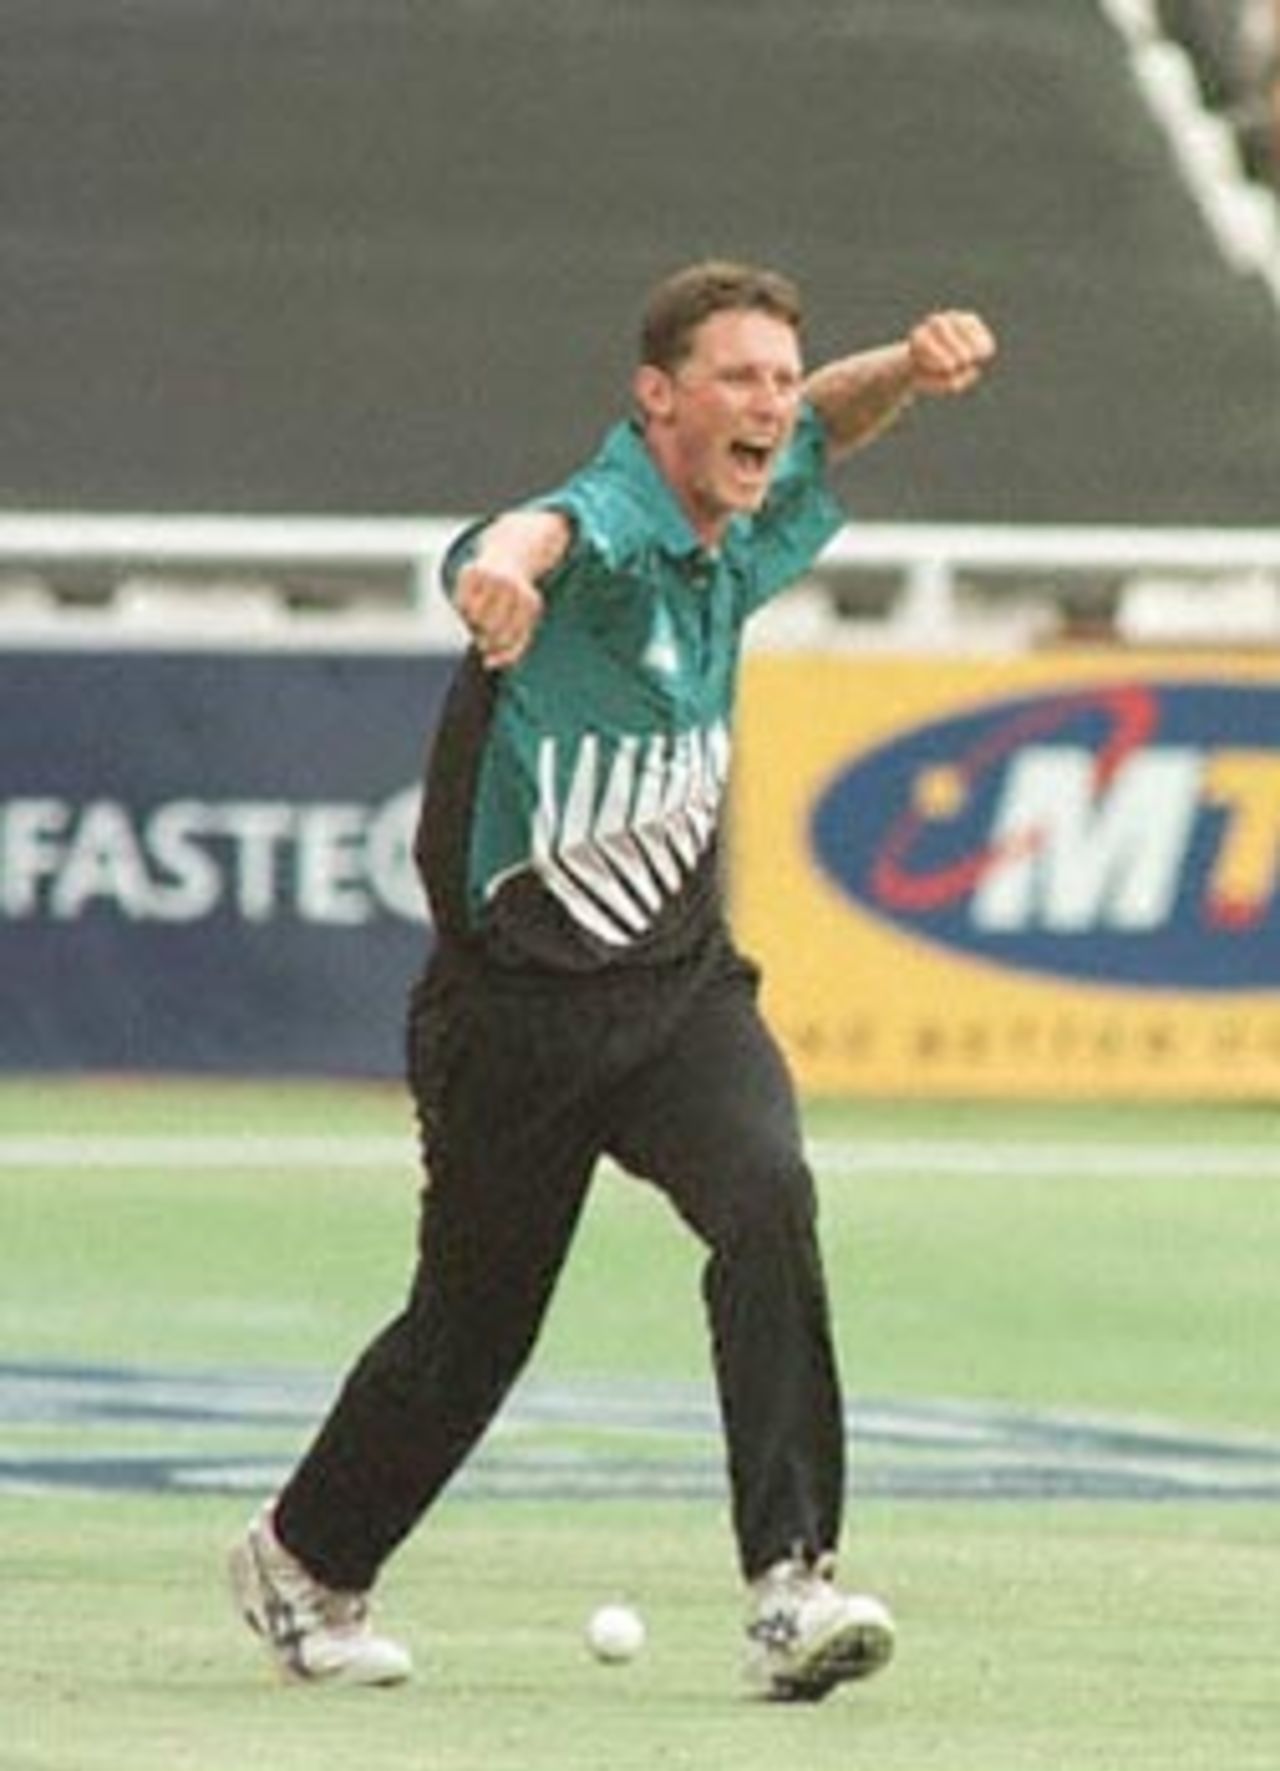 Shayne O'Connor pumps his fist after picking up Kallis. New Zealand in South Africa 2000/01, 6th One-Day International, South Africa v New Zealand, Newlands, Cape Town, 04 November 2000